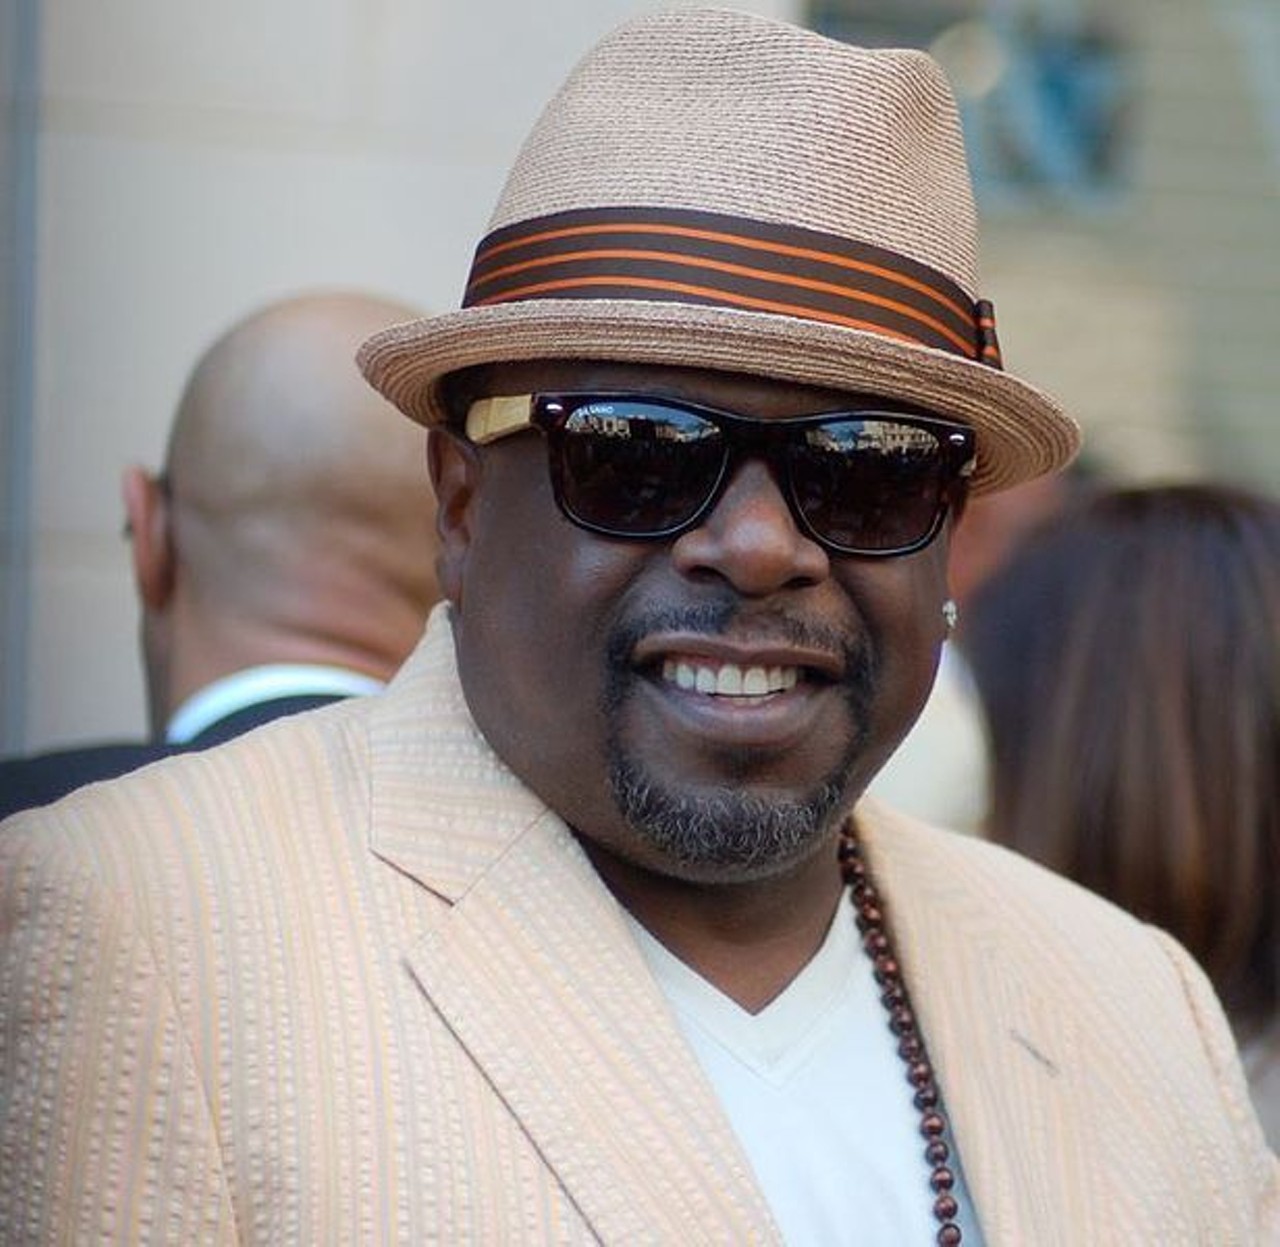 Cedric the Entertainer
11/21 at Soundboard - Motor City Casino Hotel, Detroit
When he’s not appearing in movies like Larry Crowne and Ice Age, Cedric the Entertainer is living up to his name on stages up and down the country. Fave quote: “Never in life do you hear about a large group of black people getting killed altogether. 'Cuz we run. We run when we see somebody else runnin'. We don't ask no questions why we runnin', we don't need no run coordinator to get the runnin' all organized. If I'm with you, and you start runnin'...dammit, I'ma start runnin'!”